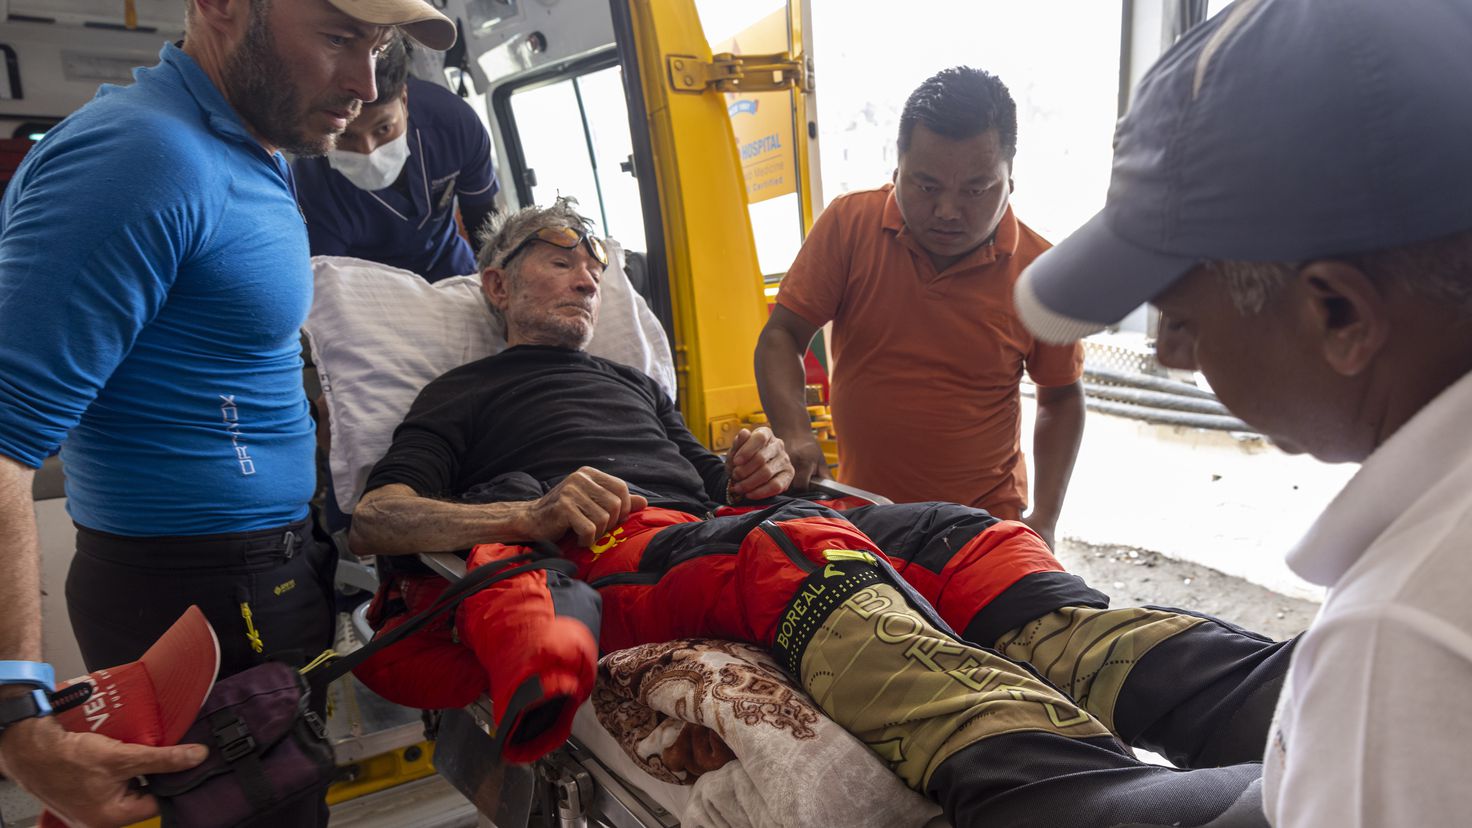 Carlos Soria is already in a hospital in Kathmandu after his accident in the Dhaulagiri
